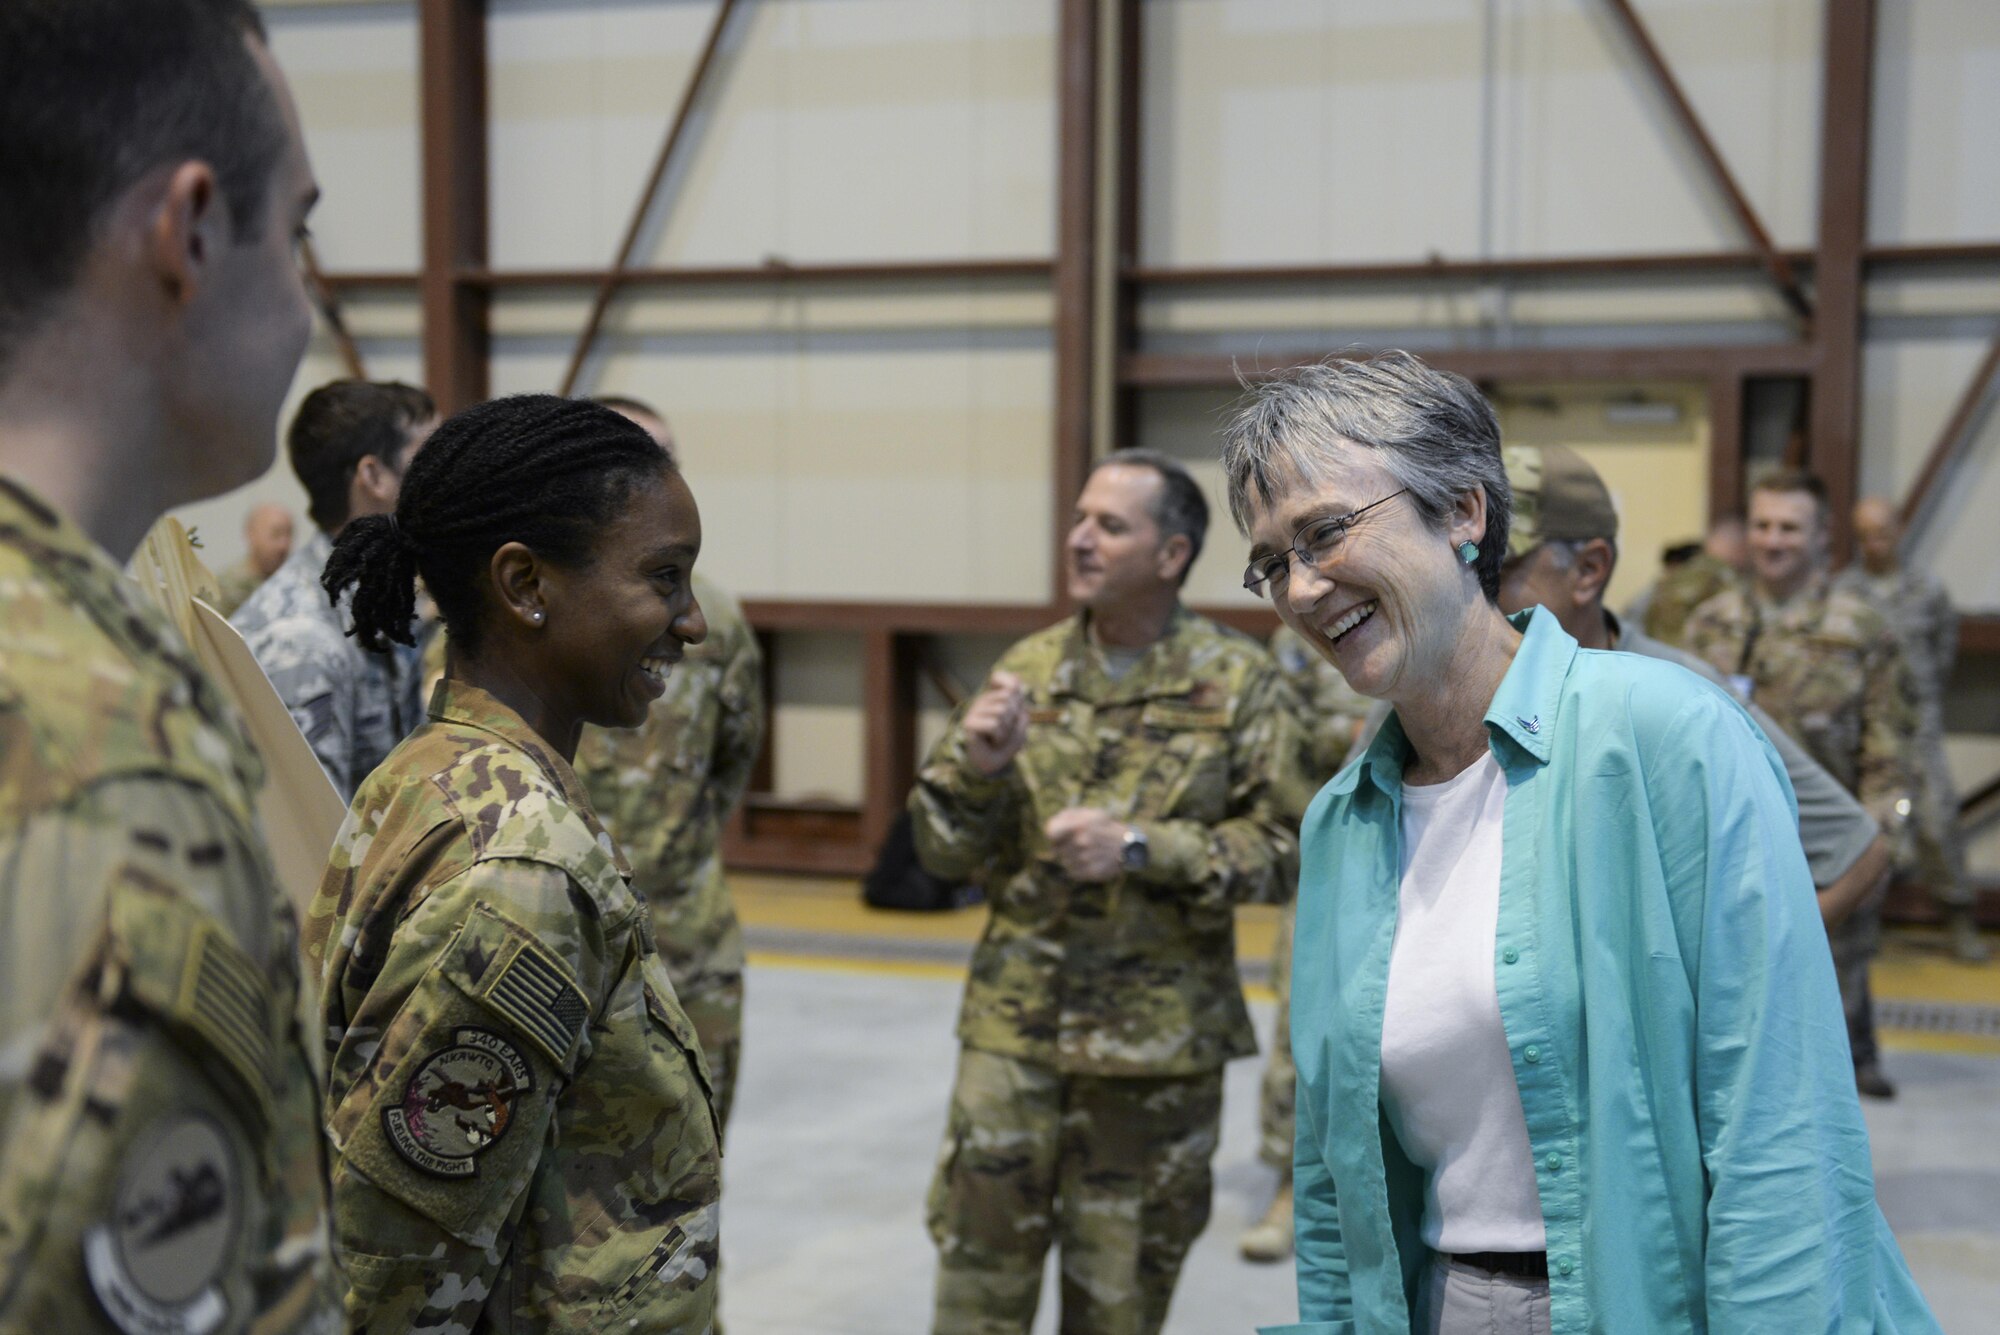 Secretary of the Air Force Heather Wilson and Air Force Chief of Staff Gen. David L. Goldfein visited the Airmen deployed to Al Udeid Air Base, Qatar during an immersive tour of the base capabilities dedicated to supporting the fight against extremists in Southwest Asia.